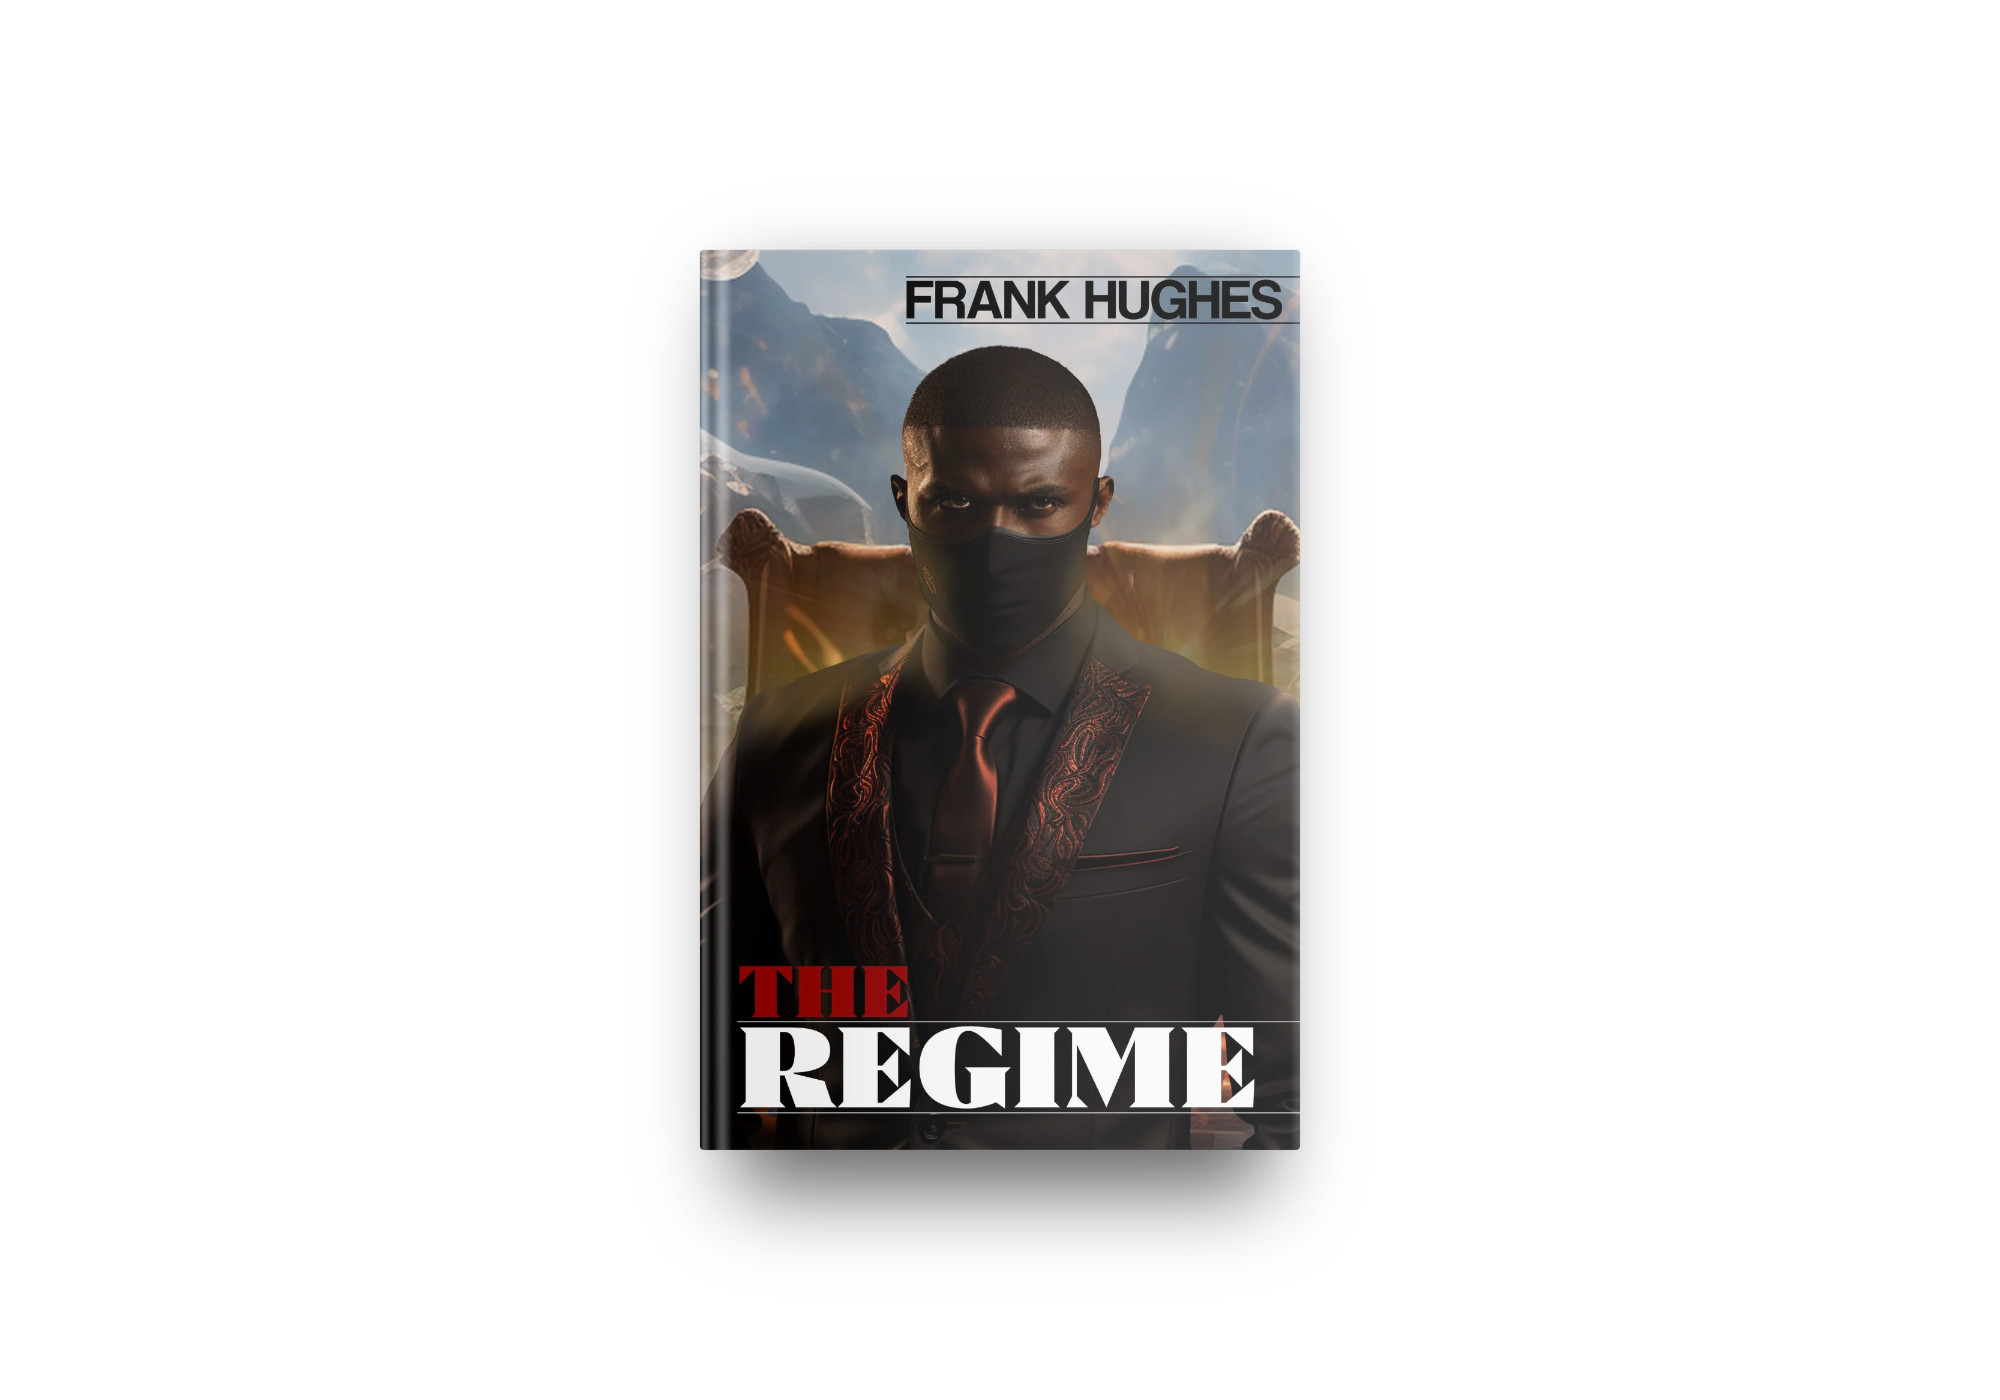 The Regime by Frank Hughes